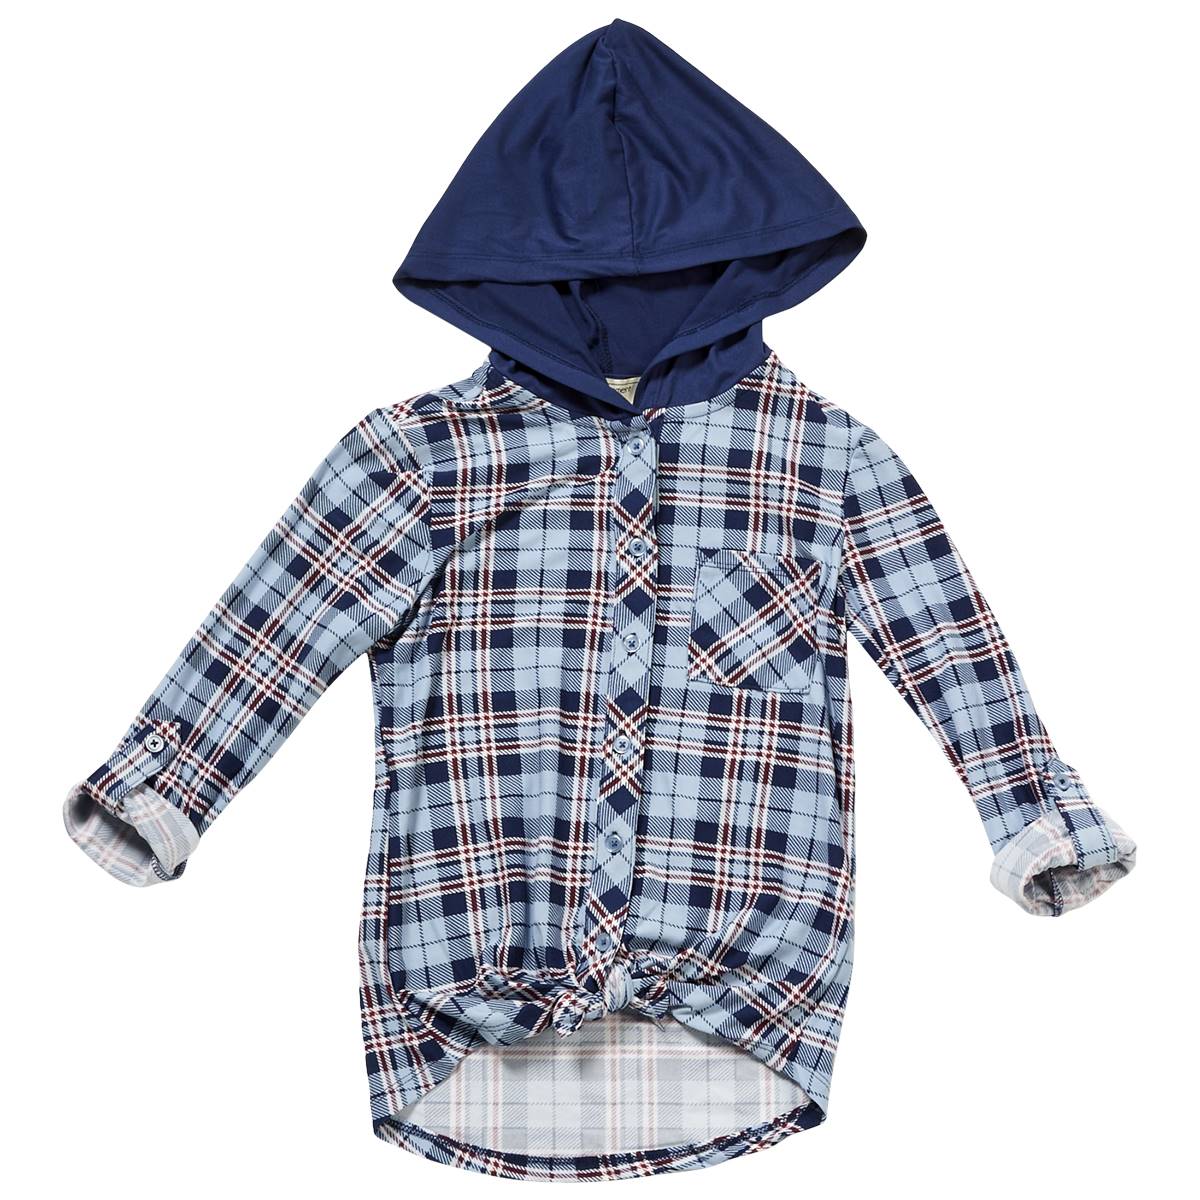 Girls (7-16) No Comment Hooded Button Down Top - Bejewel Plaid